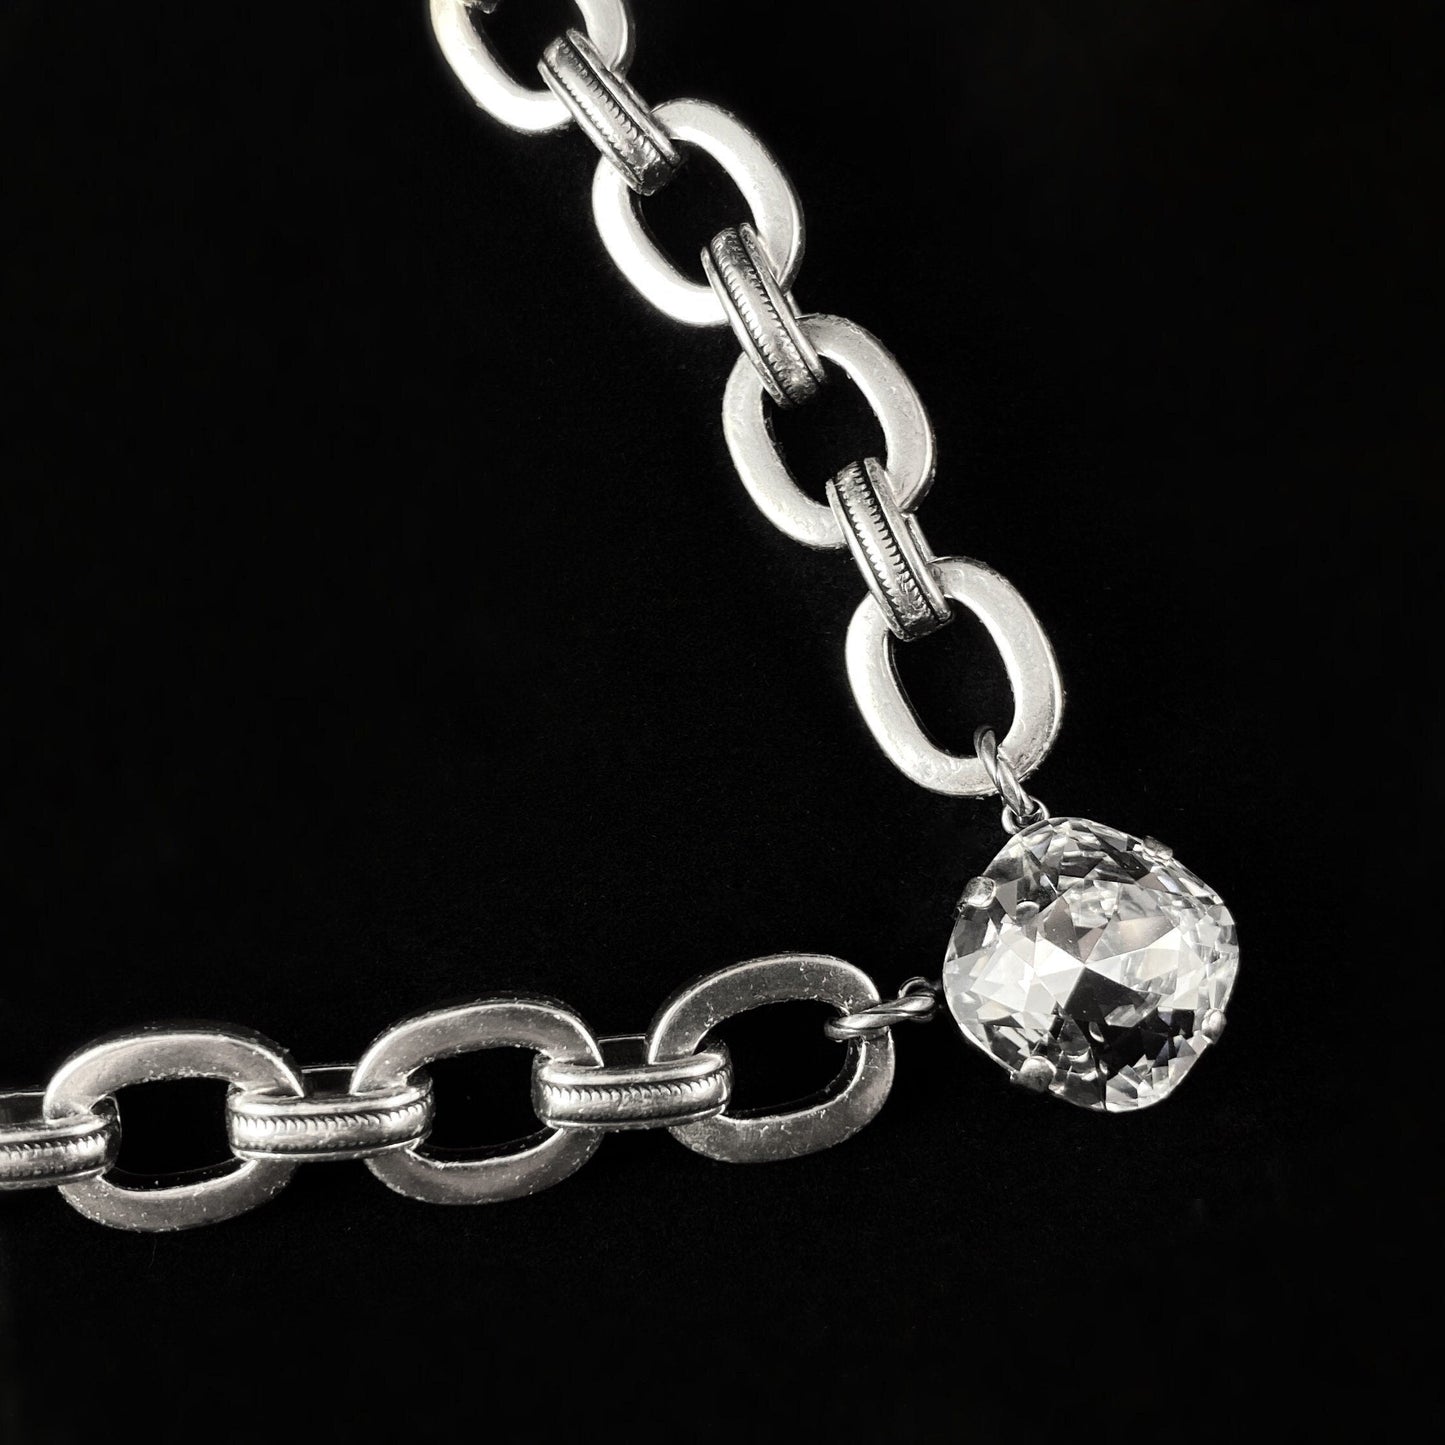 Chunky Silver Chain Necklace with Cushion Cut Clear Swarovski Crystal - La Vie Parisienne by Catherine Popesco